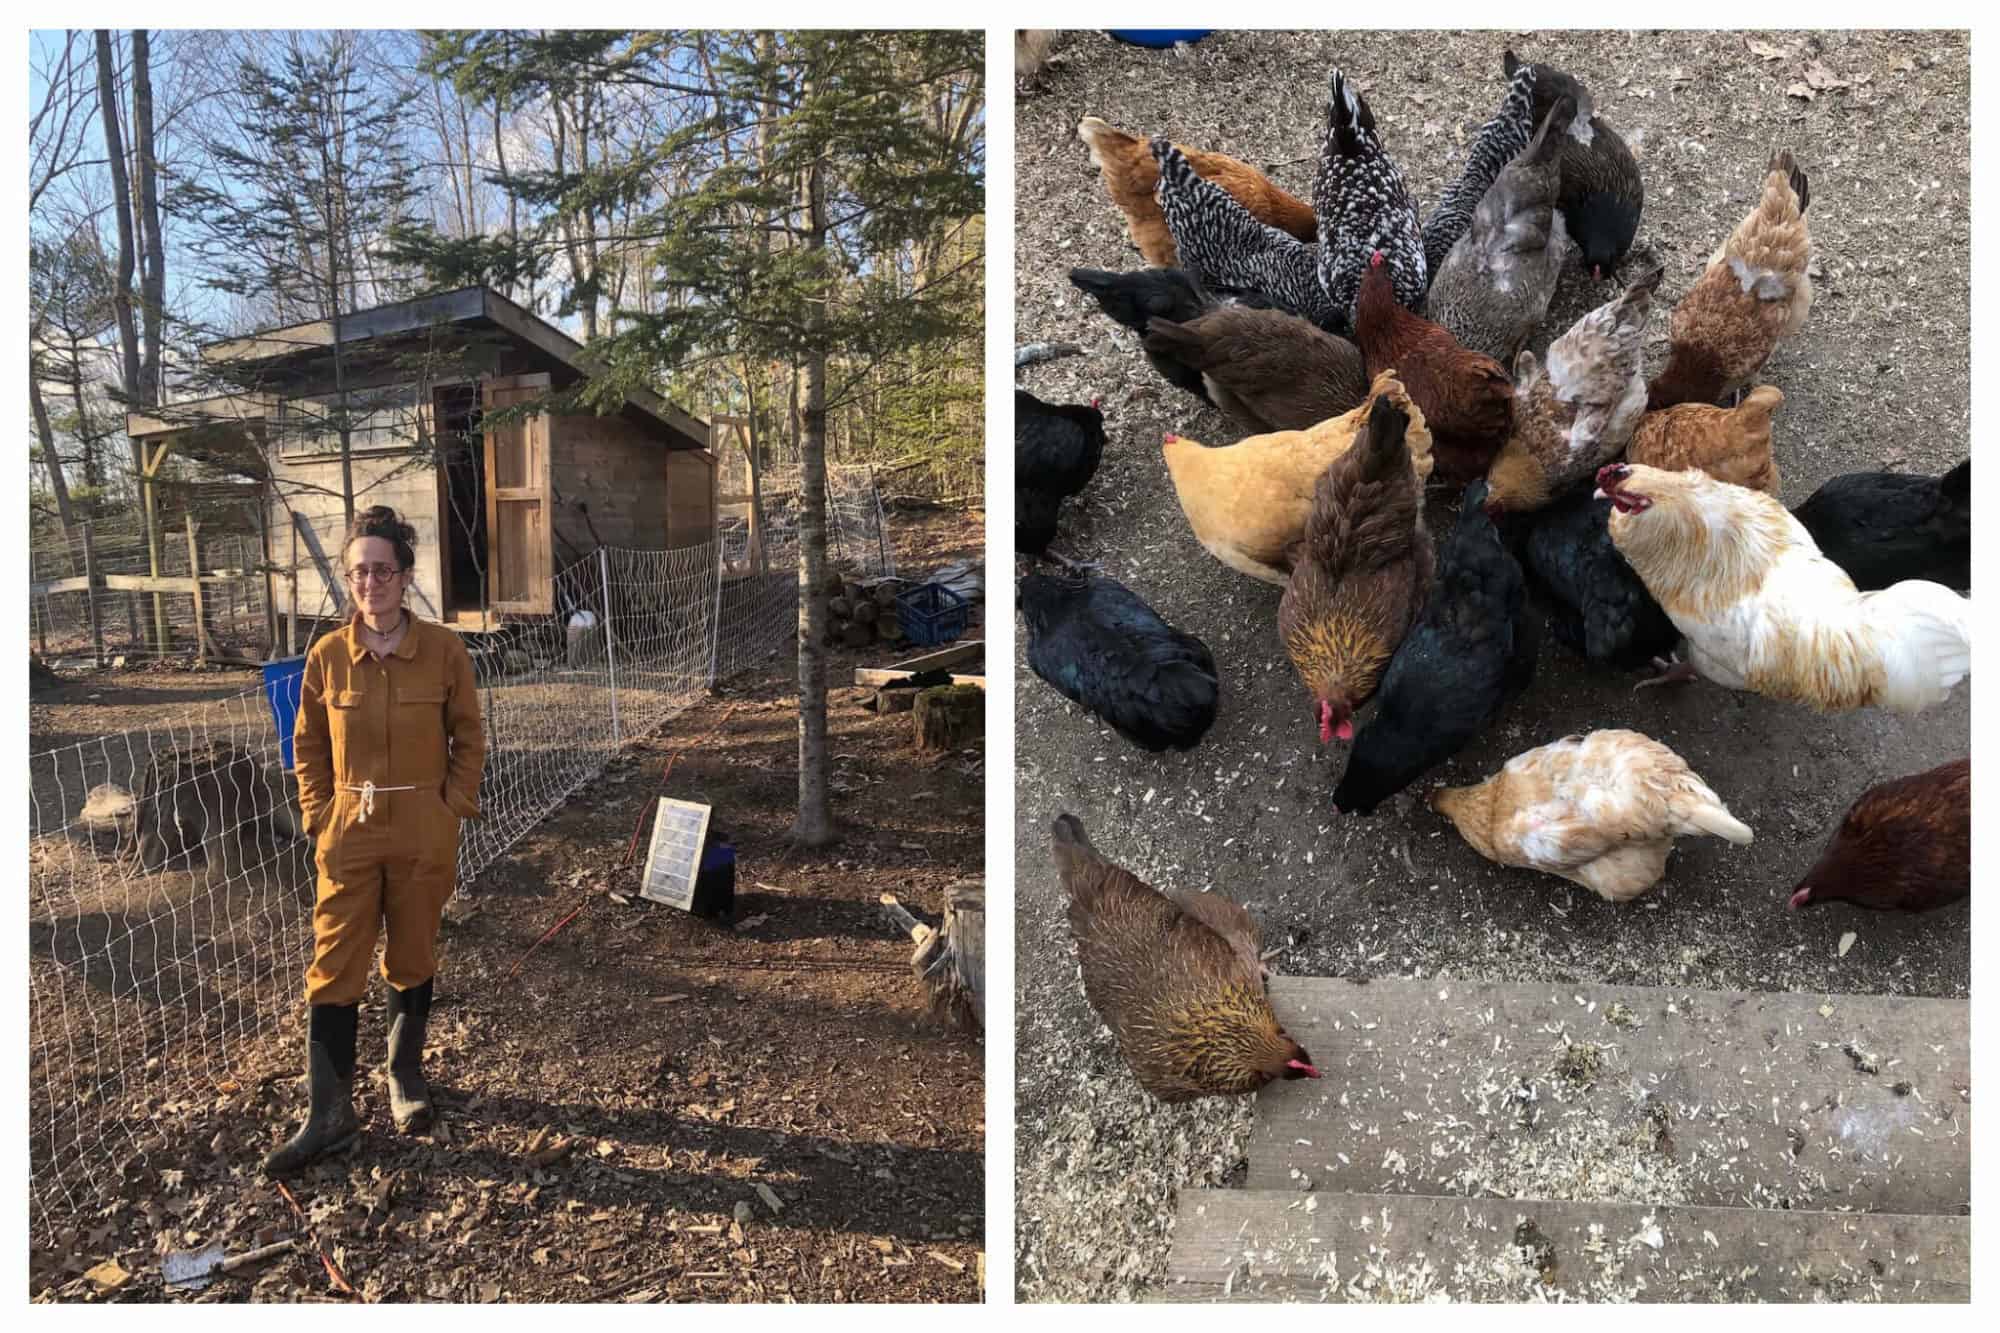 Left: Erica stands near the chicken coop on her farm in Maine.
Right: Erica's chickens gather to eat on her farm in Maine.